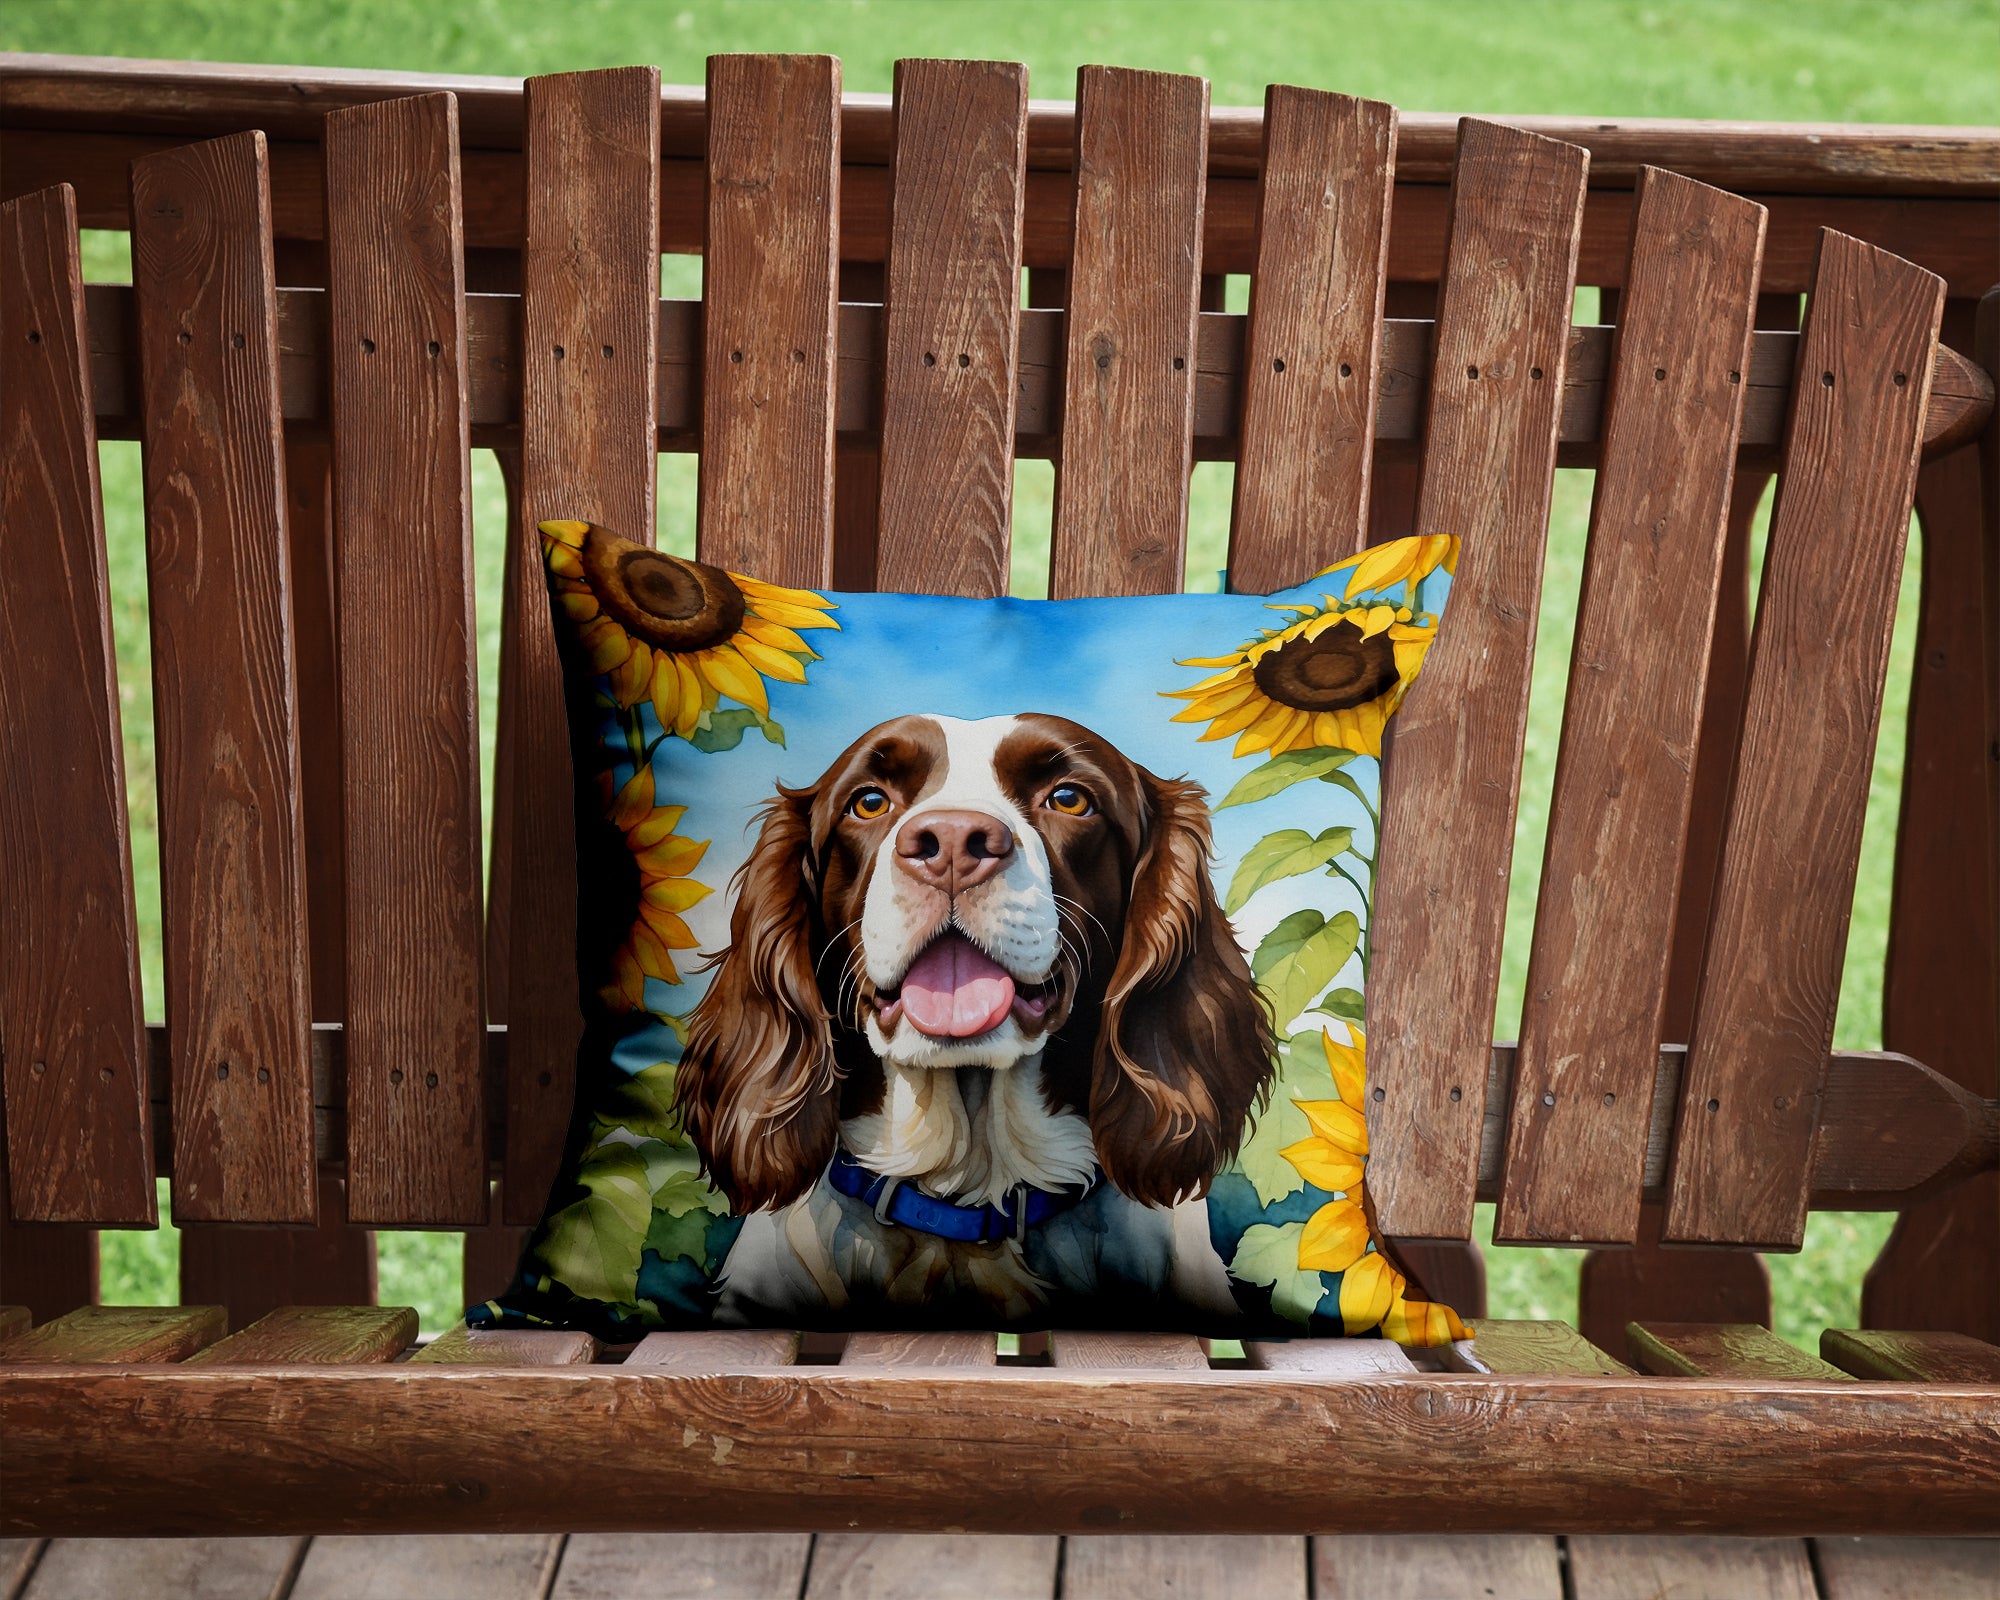 Buy this English Springer Spaniel in Sunflowers Throw Pillow